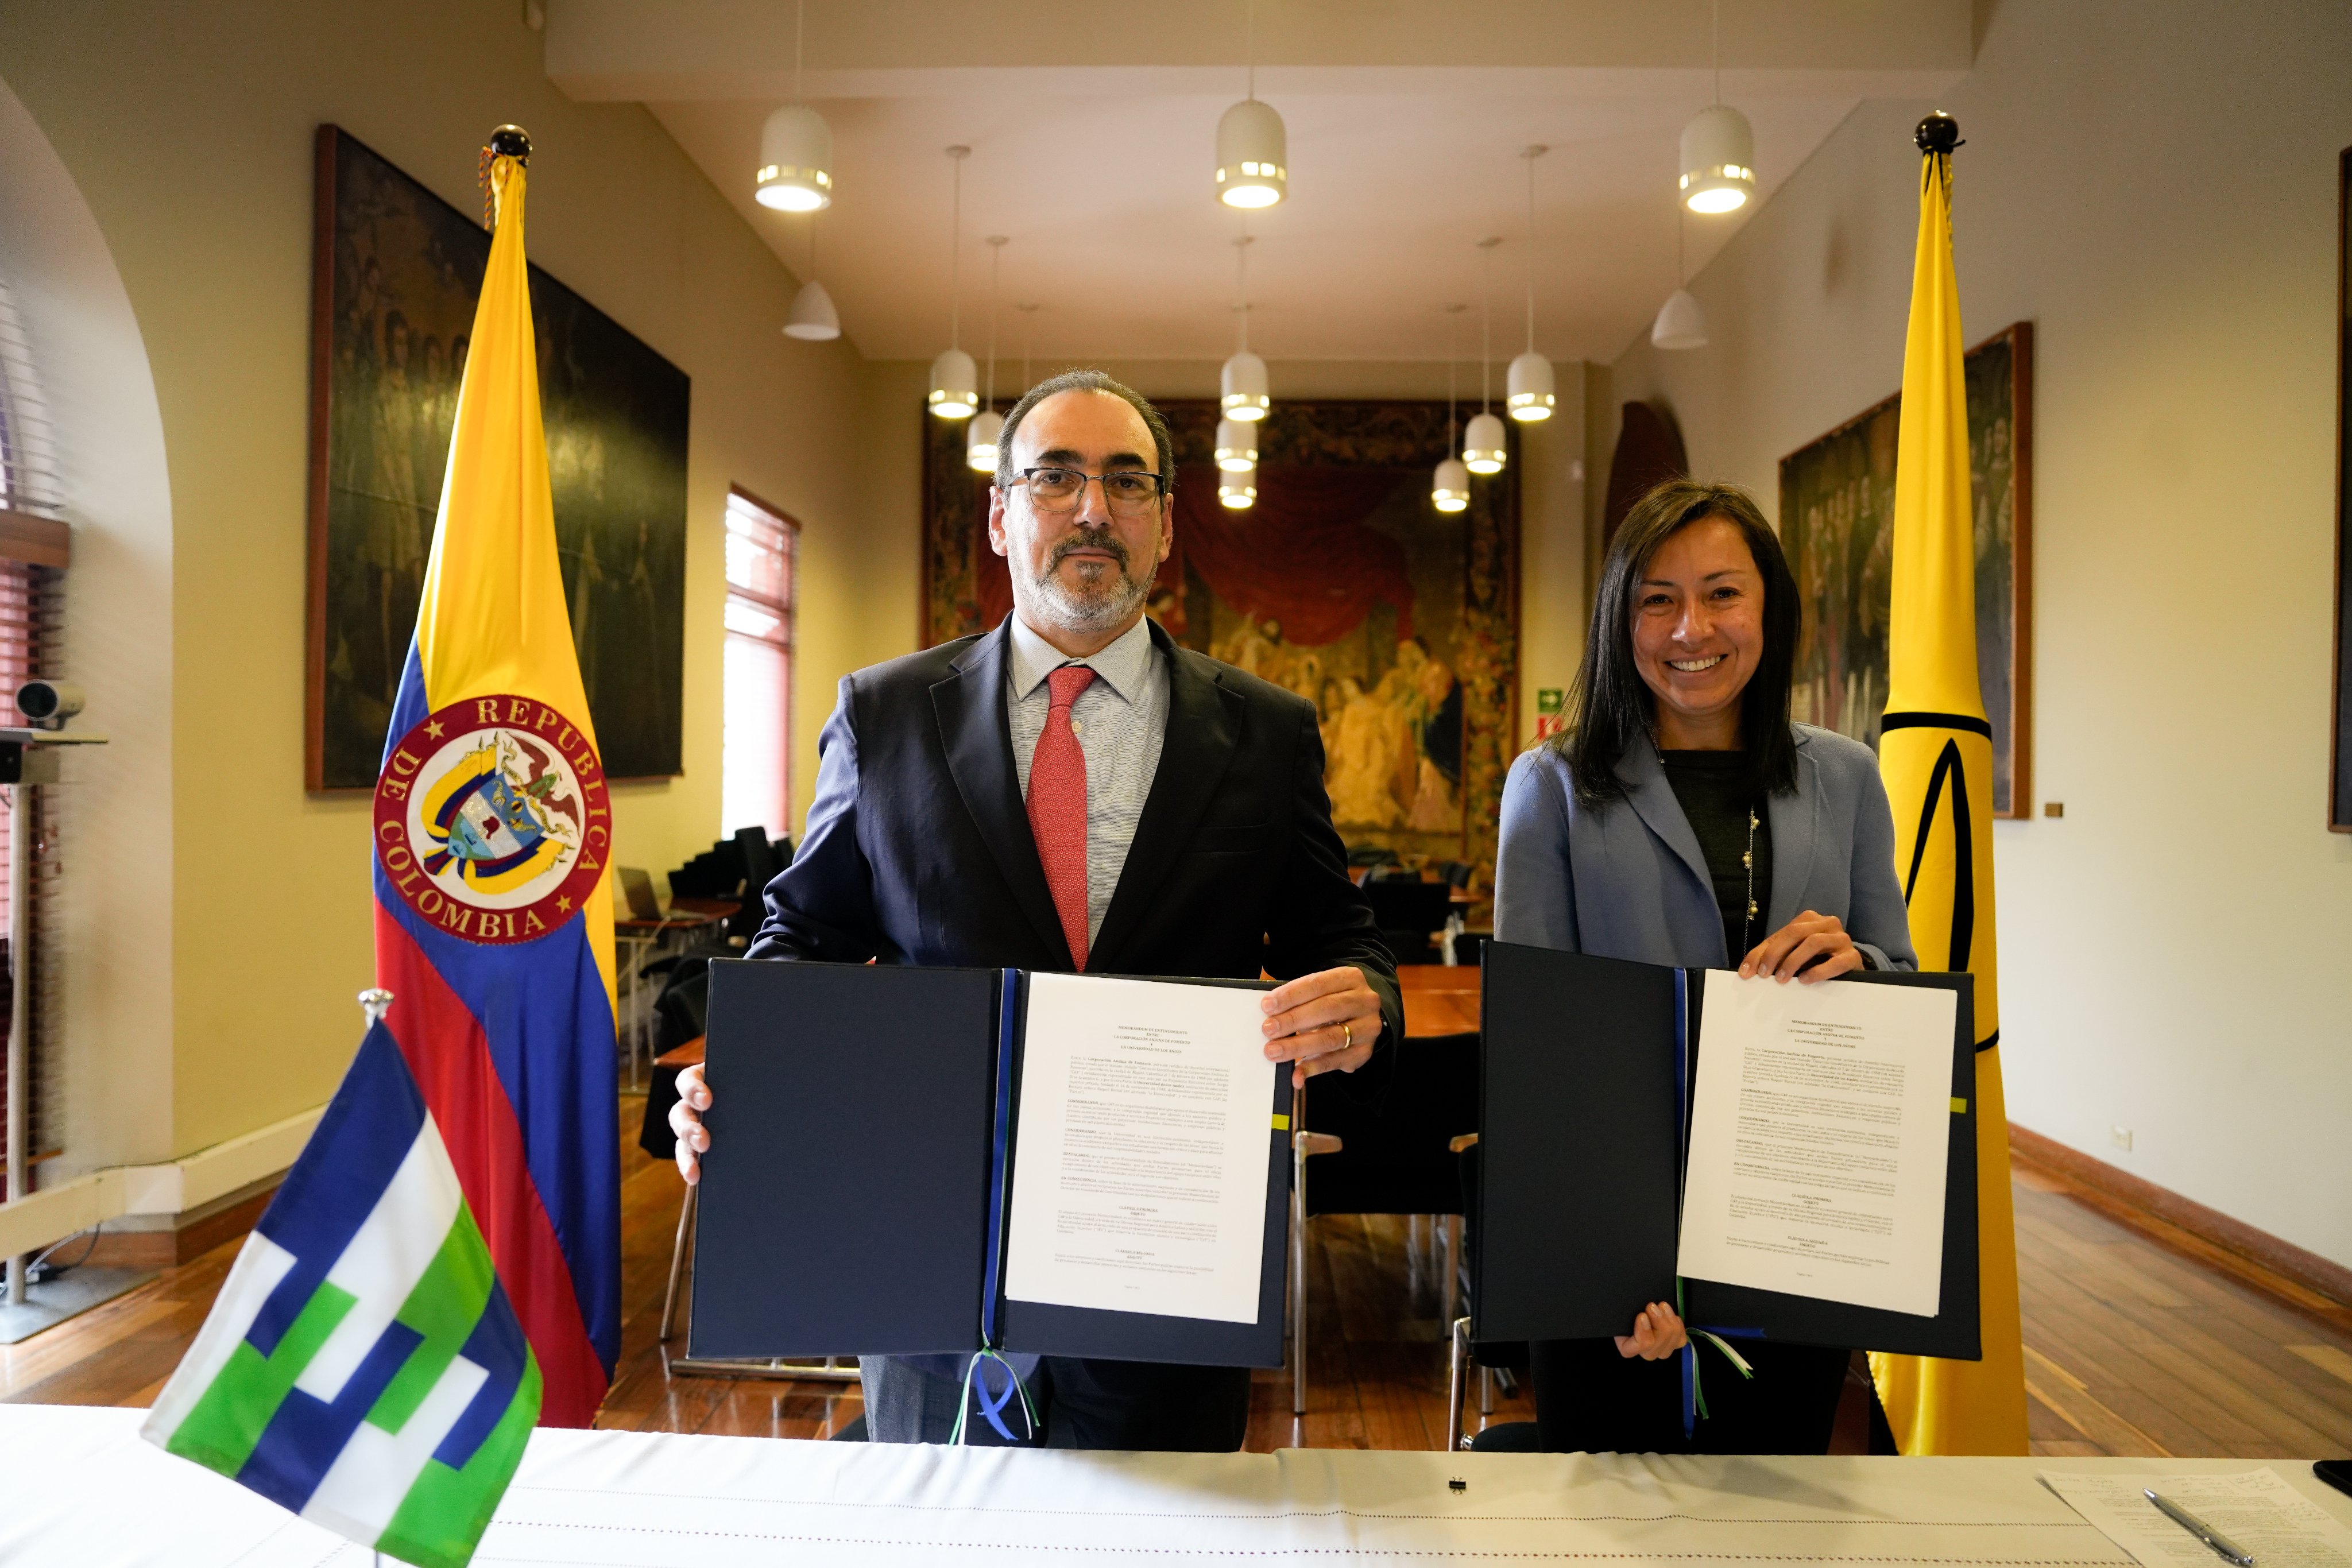 CAF and the Universidad de los Andes will work together